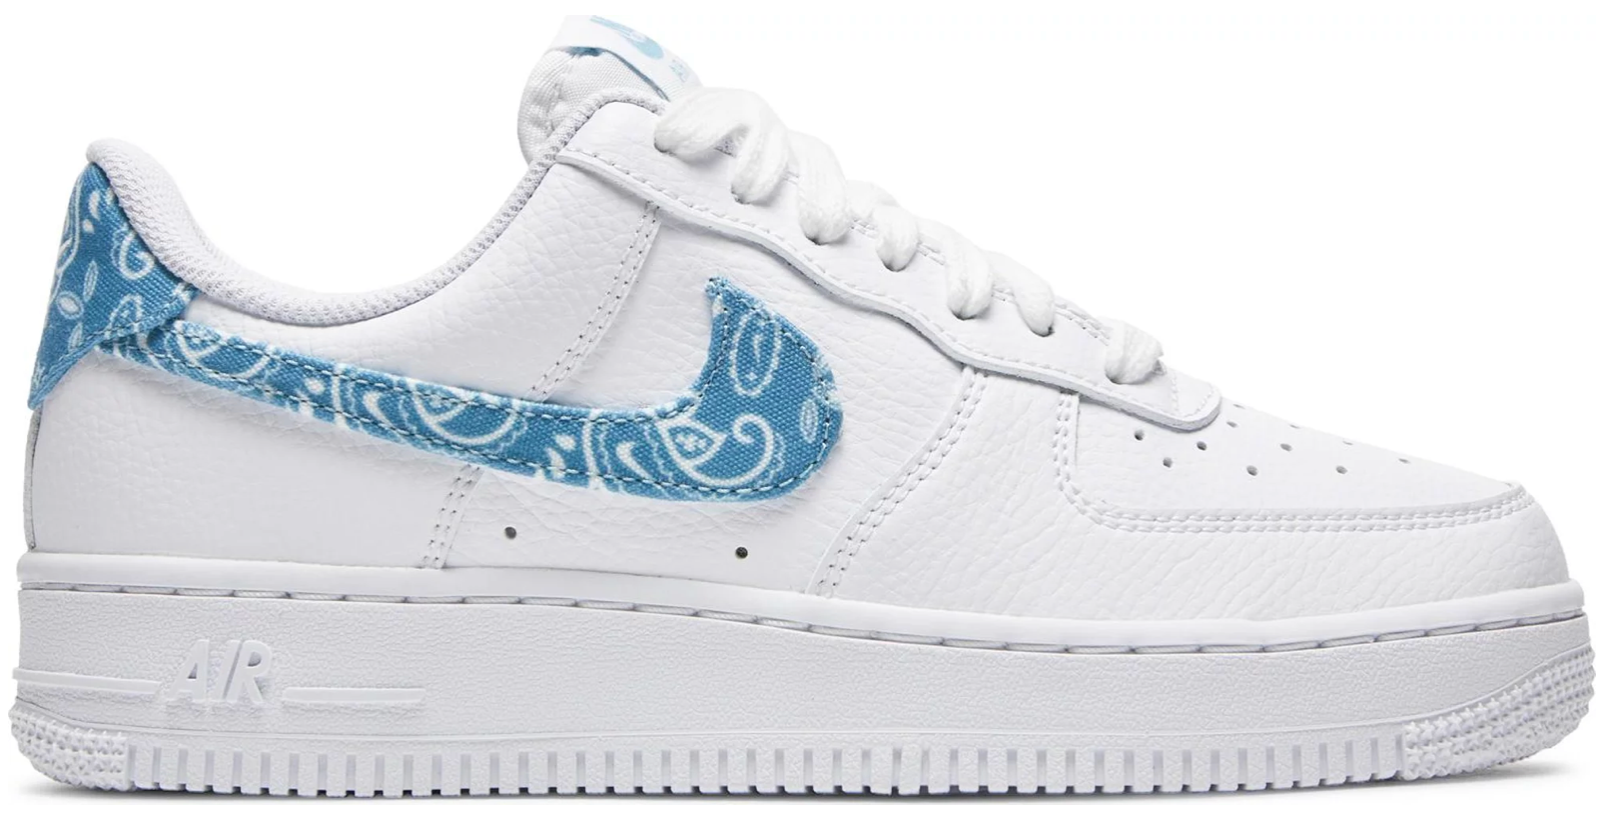 NIKE AIR FORCE 1 LOW '07 ESSENTIAL WHITE WORN BLUE PAISLEY (W)